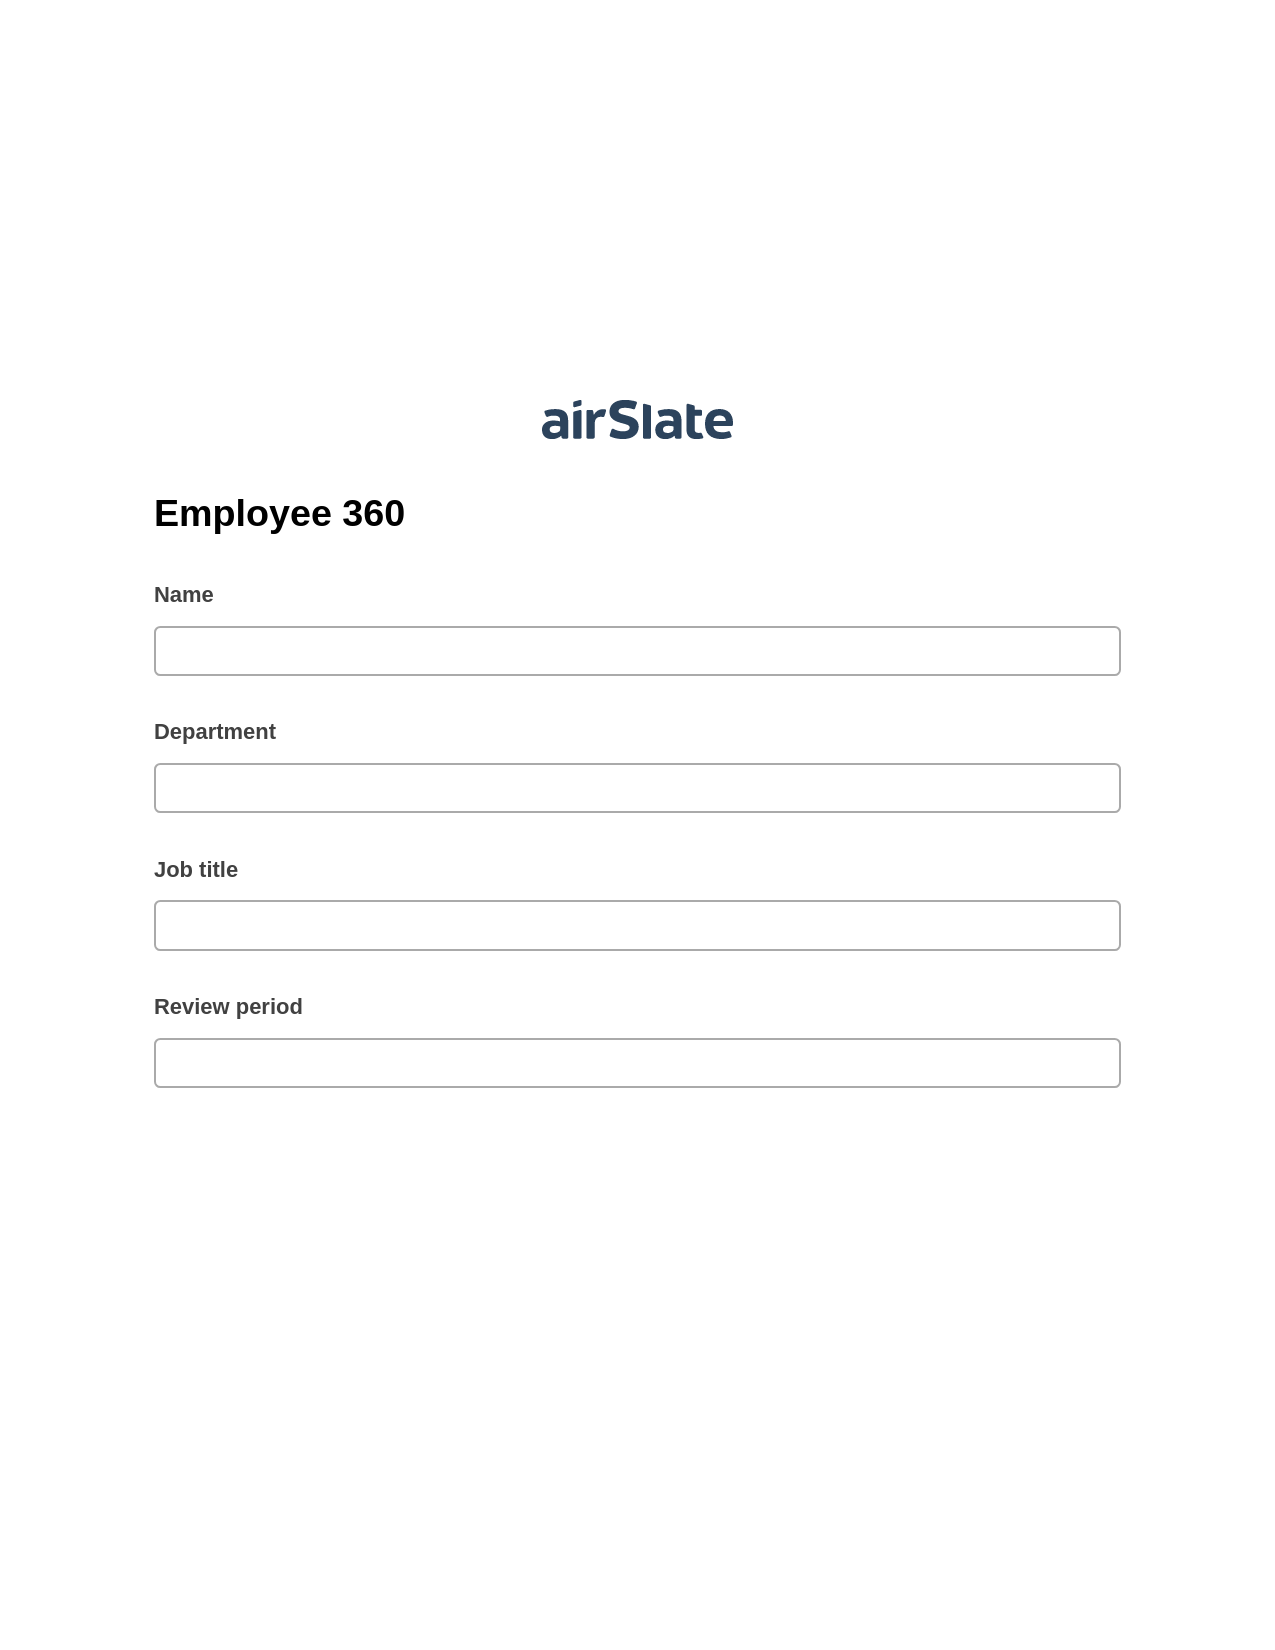 Employee 360 Pre-fill from MS Dynamics 365 Records, Update MS Dynamics 365 Record Bot, Slack Two-Way Binding Bot